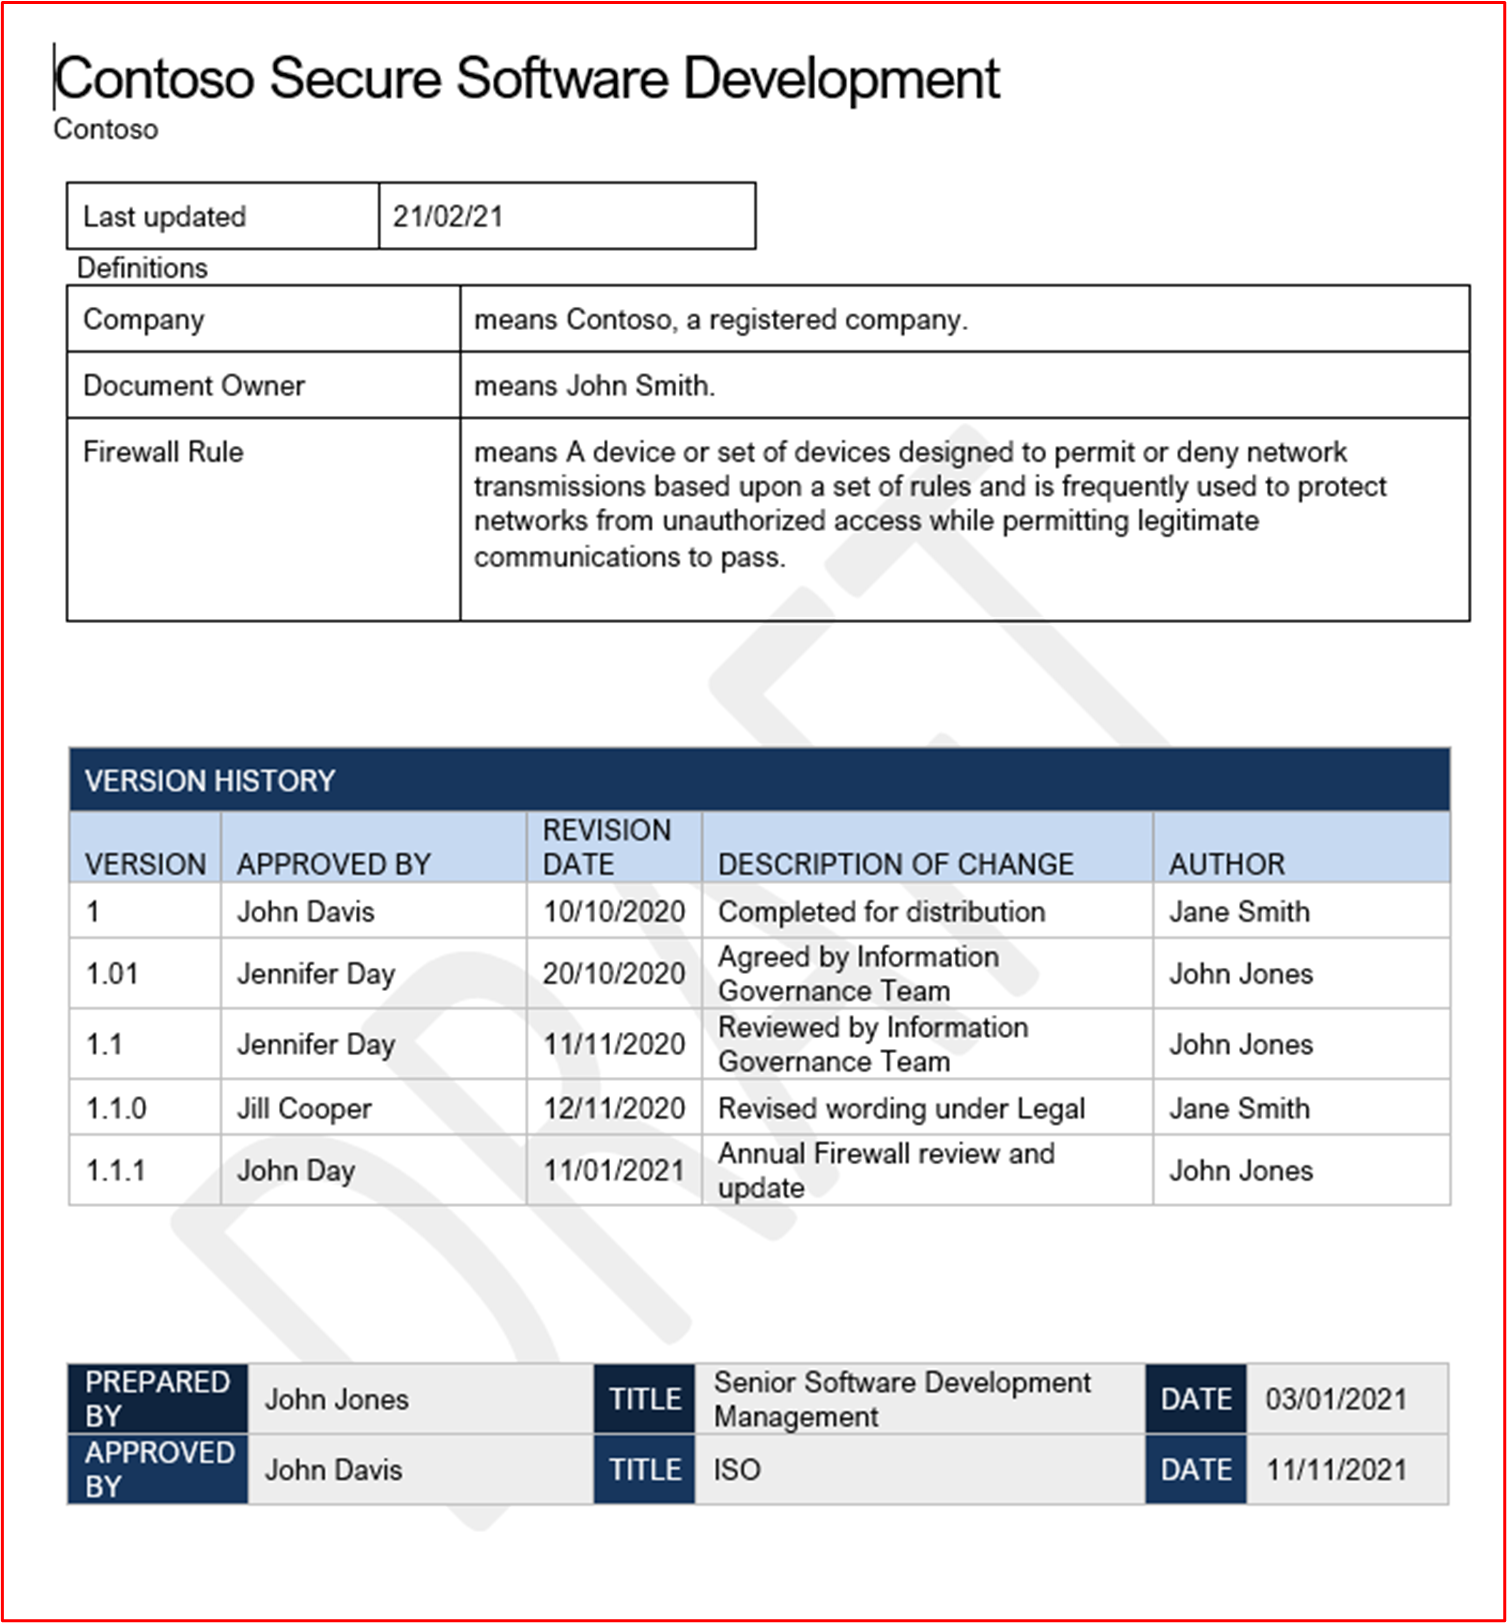 Screenshot of an extract from Contoso's Secure Software Development Procedure